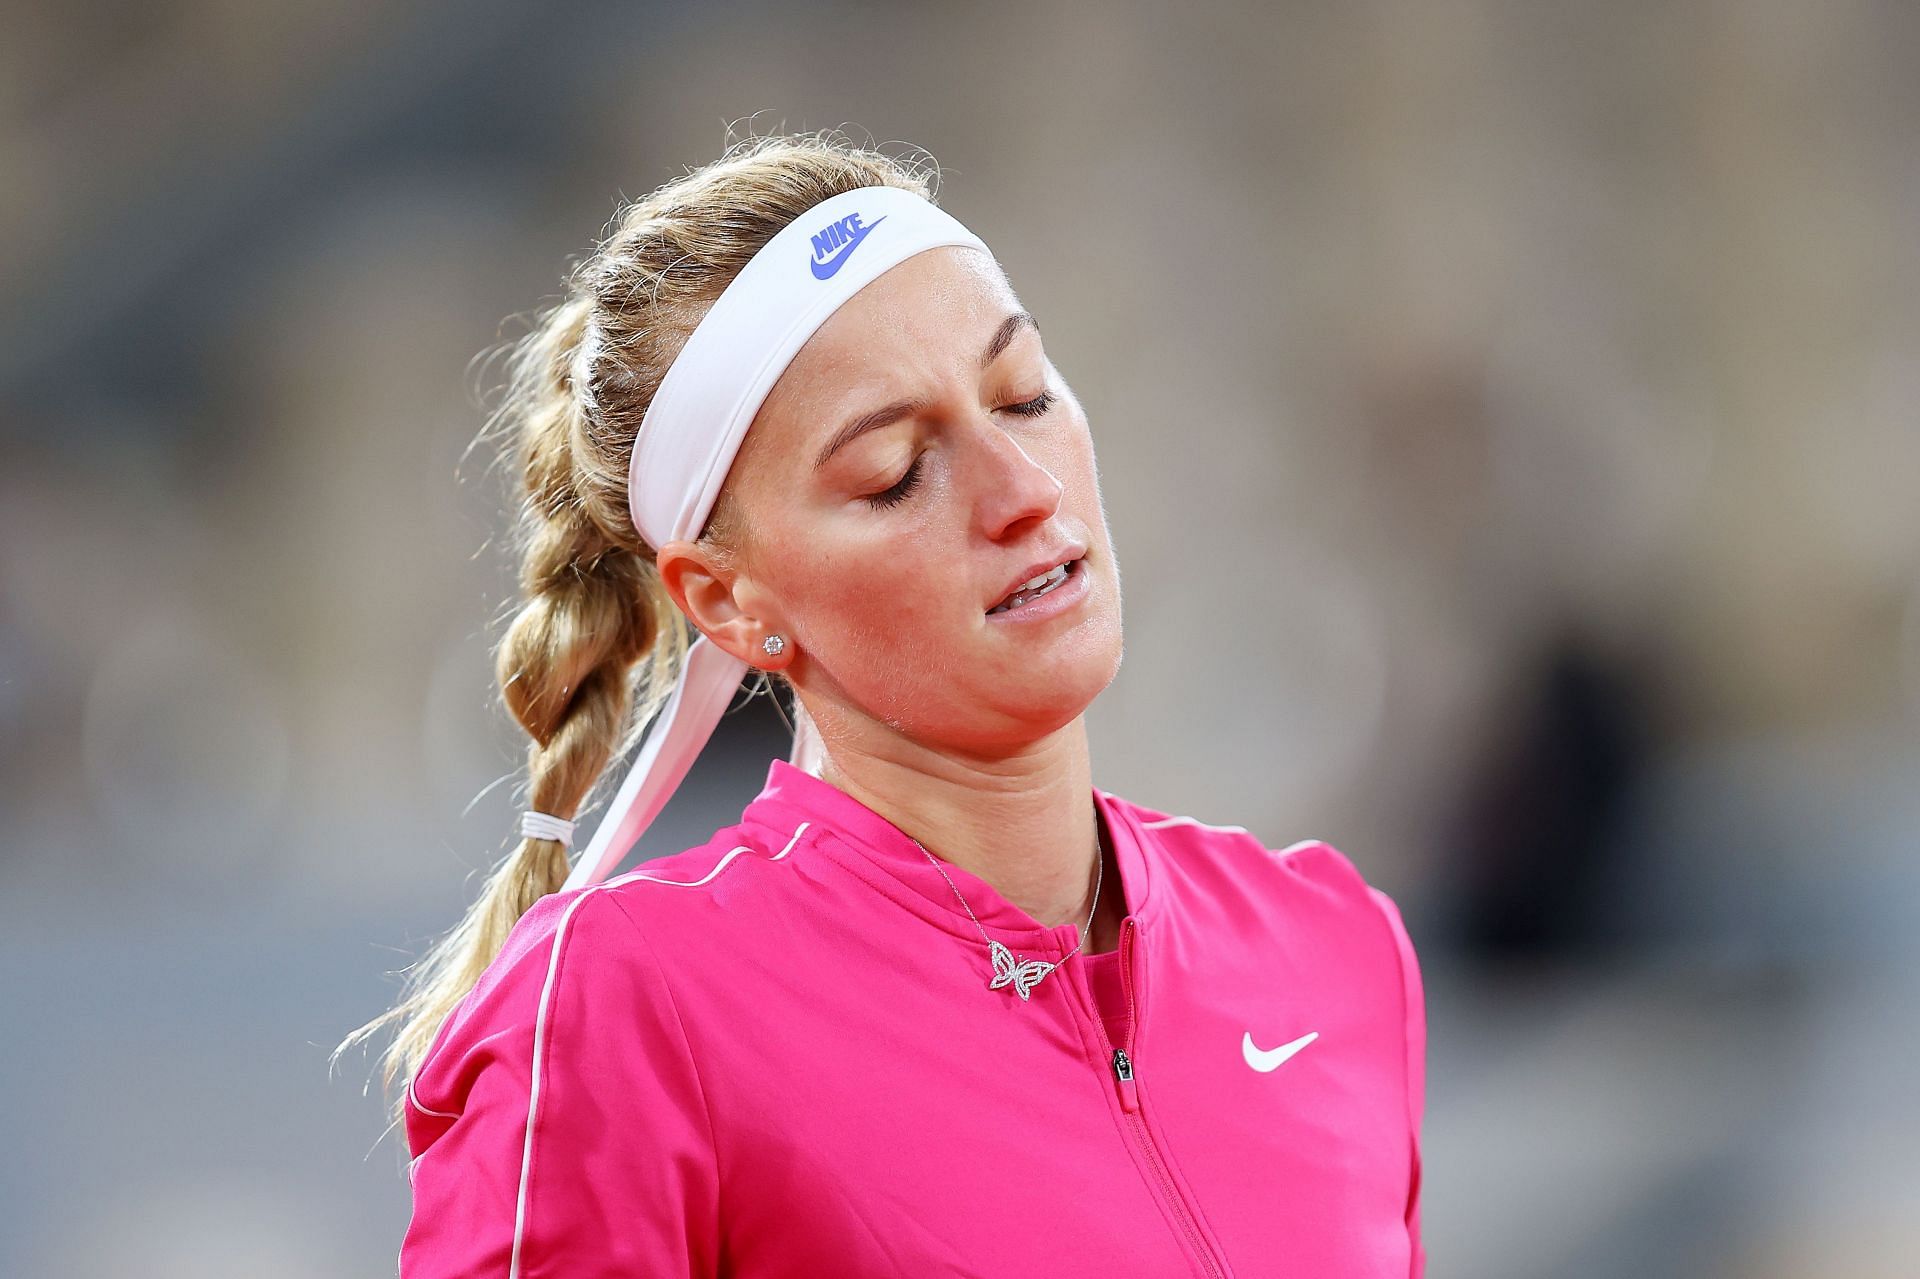 Kvitova reached the semifinals at the 2020 French Open.